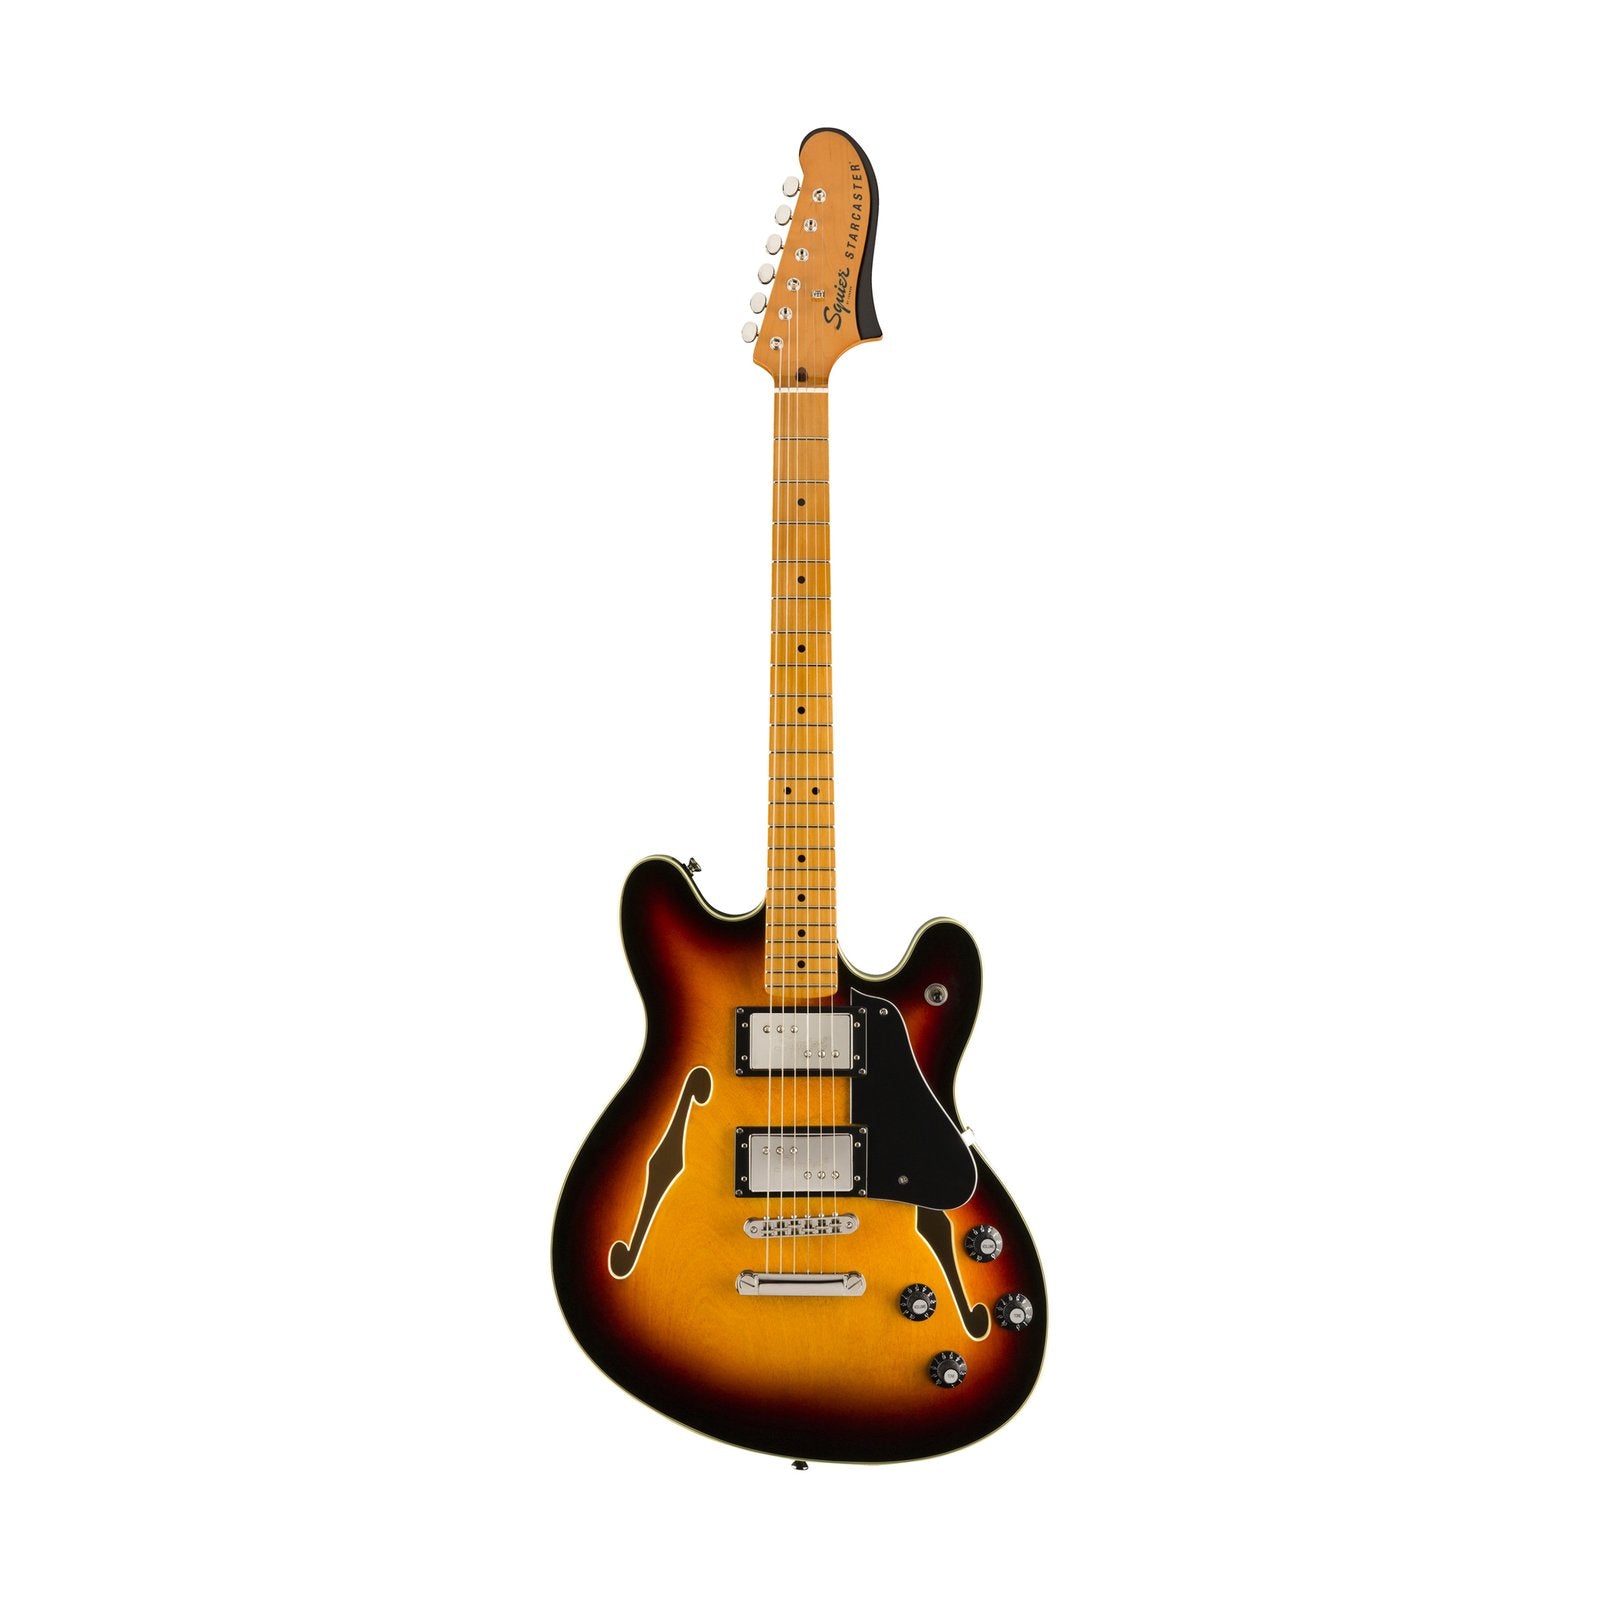 Squier Classic Vibe Starcaster Electric Guitar, Maple FB, 3-Tone Sunburst, SQUIER BY FENDER, ELECTRIC GUITAR, squier-by-fender-electric-guitar-037-4590-500, ZOSO MUSIC SDN BHD